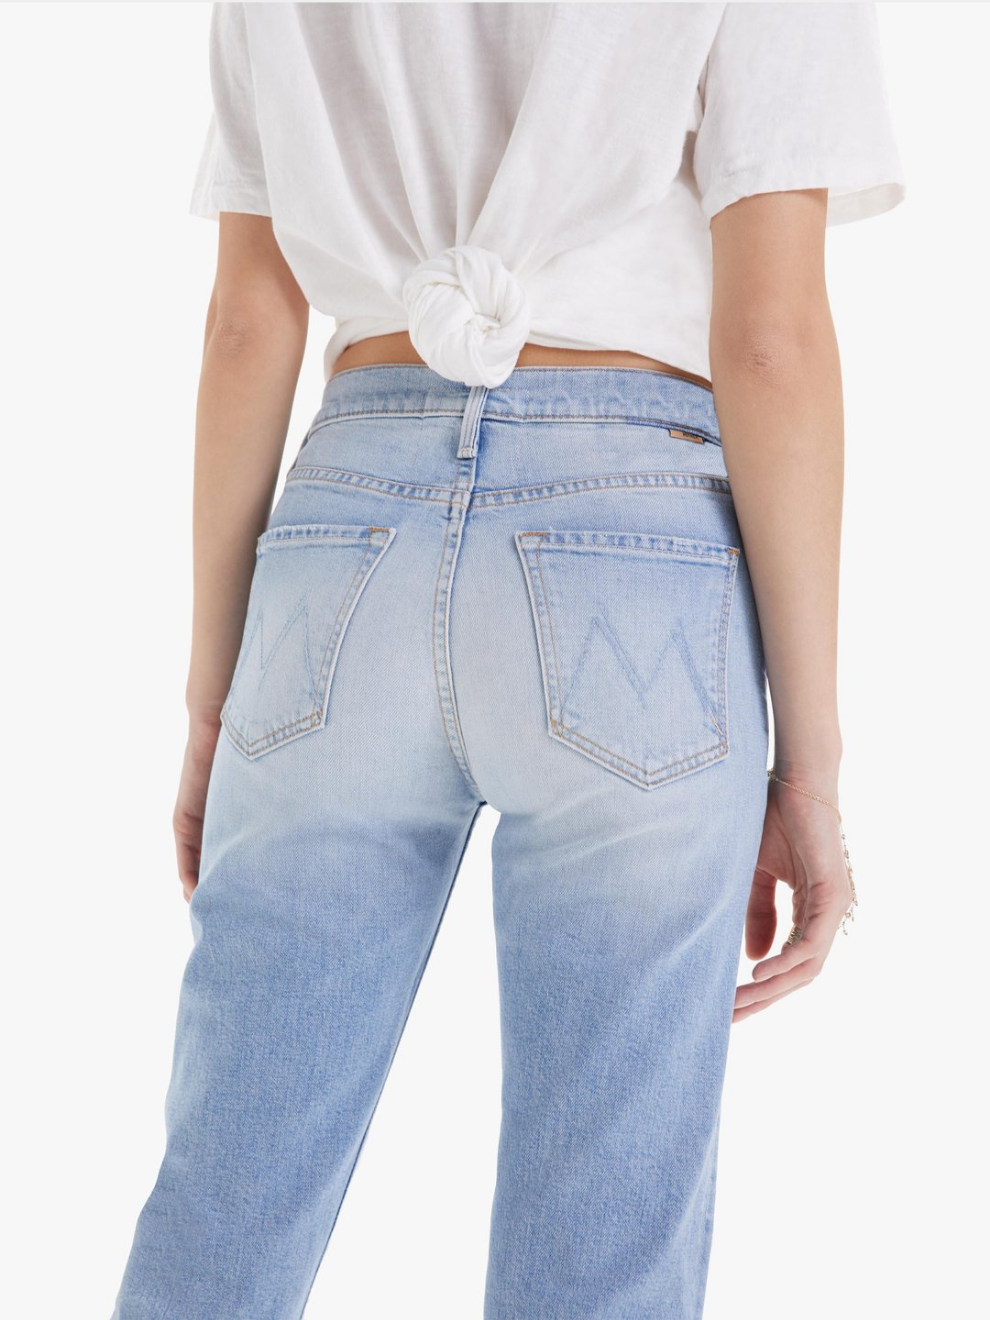 MOTHER denim jeans. Back view of The Scrapper Ankle in Bless you Again blue with rips